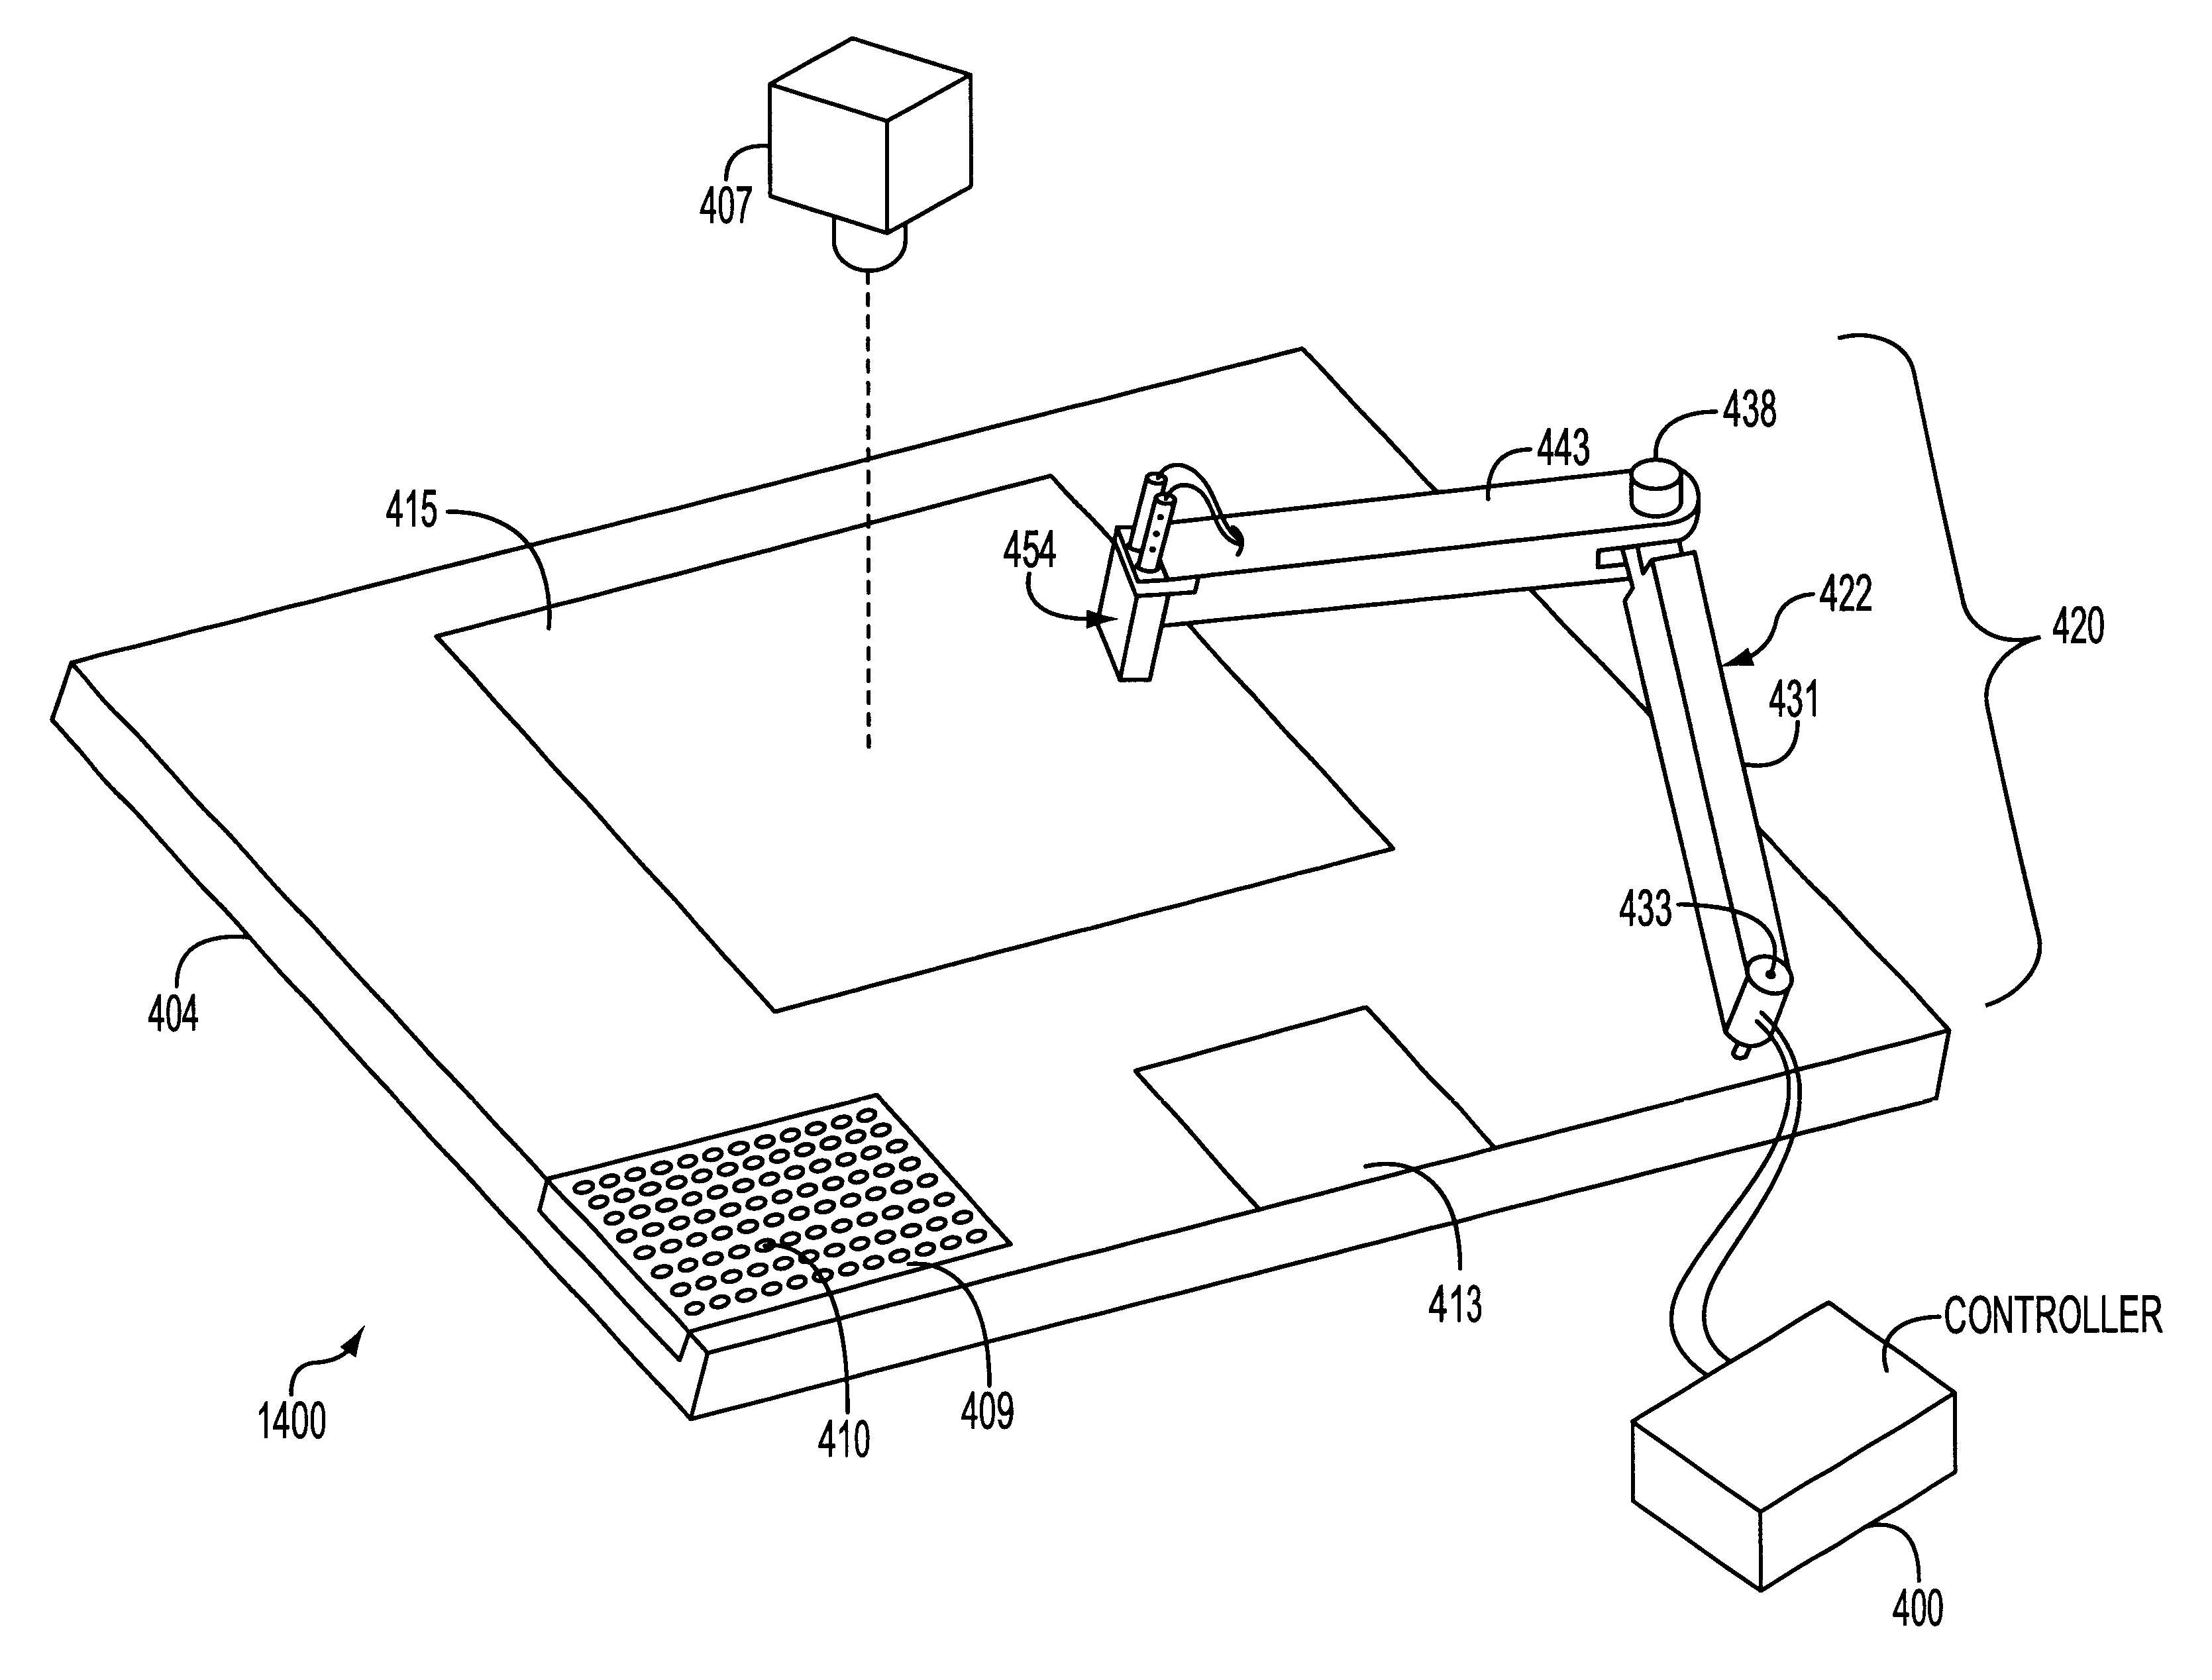 Automated system for two-dimensional electrophoresis